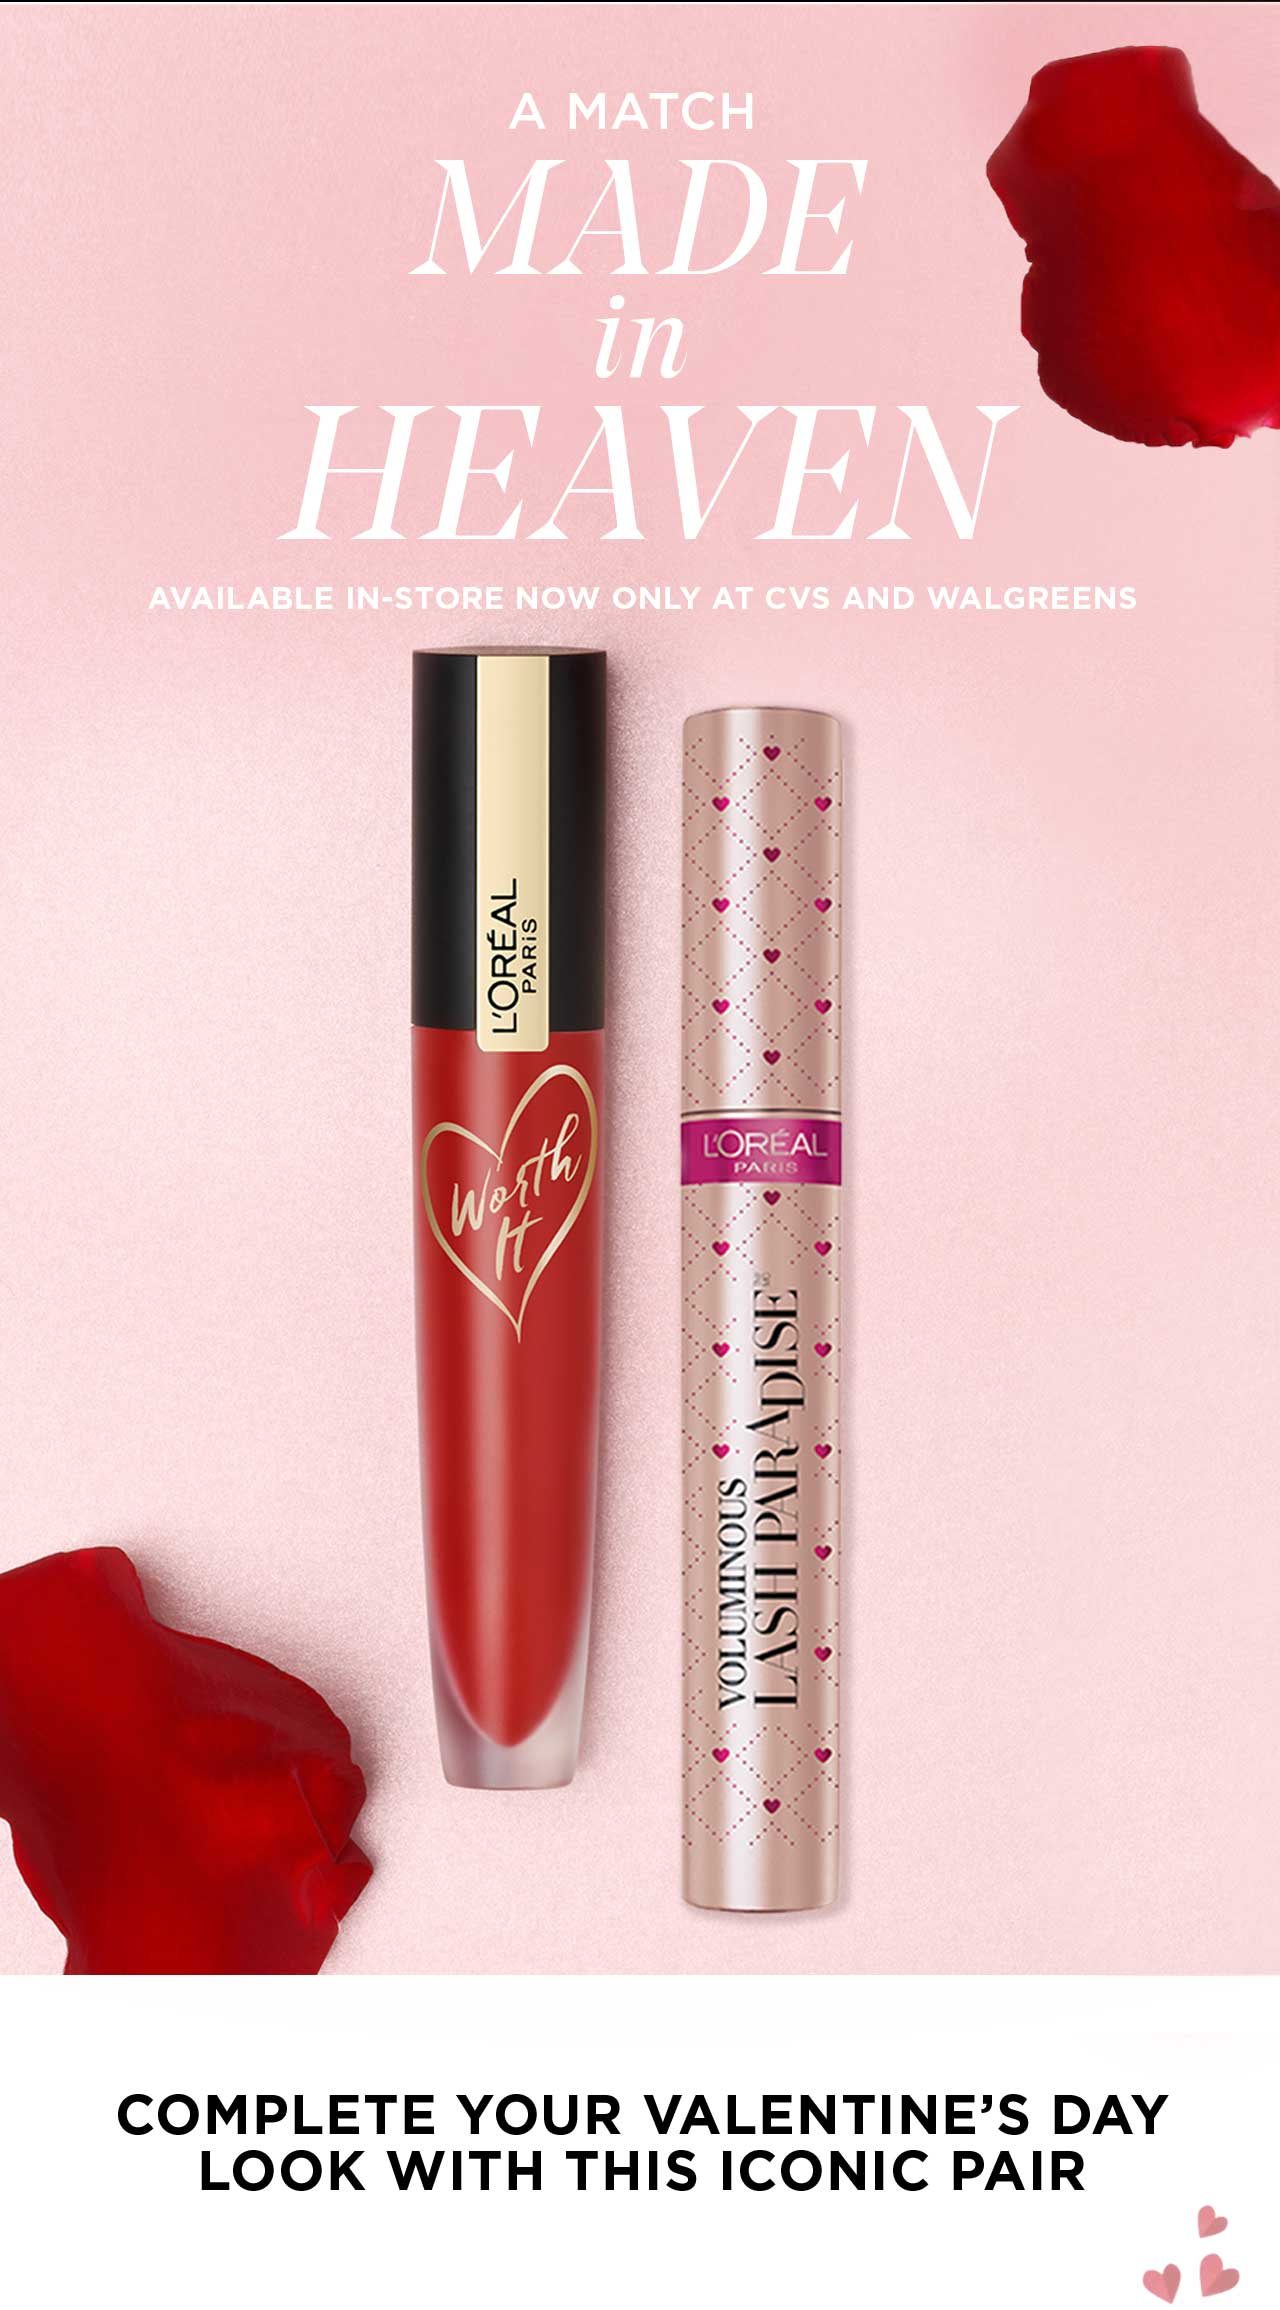 A MATCH MADE IN HEAVEN - AVAILABLE IN-STORE NOW ONLY AT CVS AND WALGREENS - COMPLETE YOUR VALENTINE’S DAY LOOK WITH THIS ICONIC PAIR